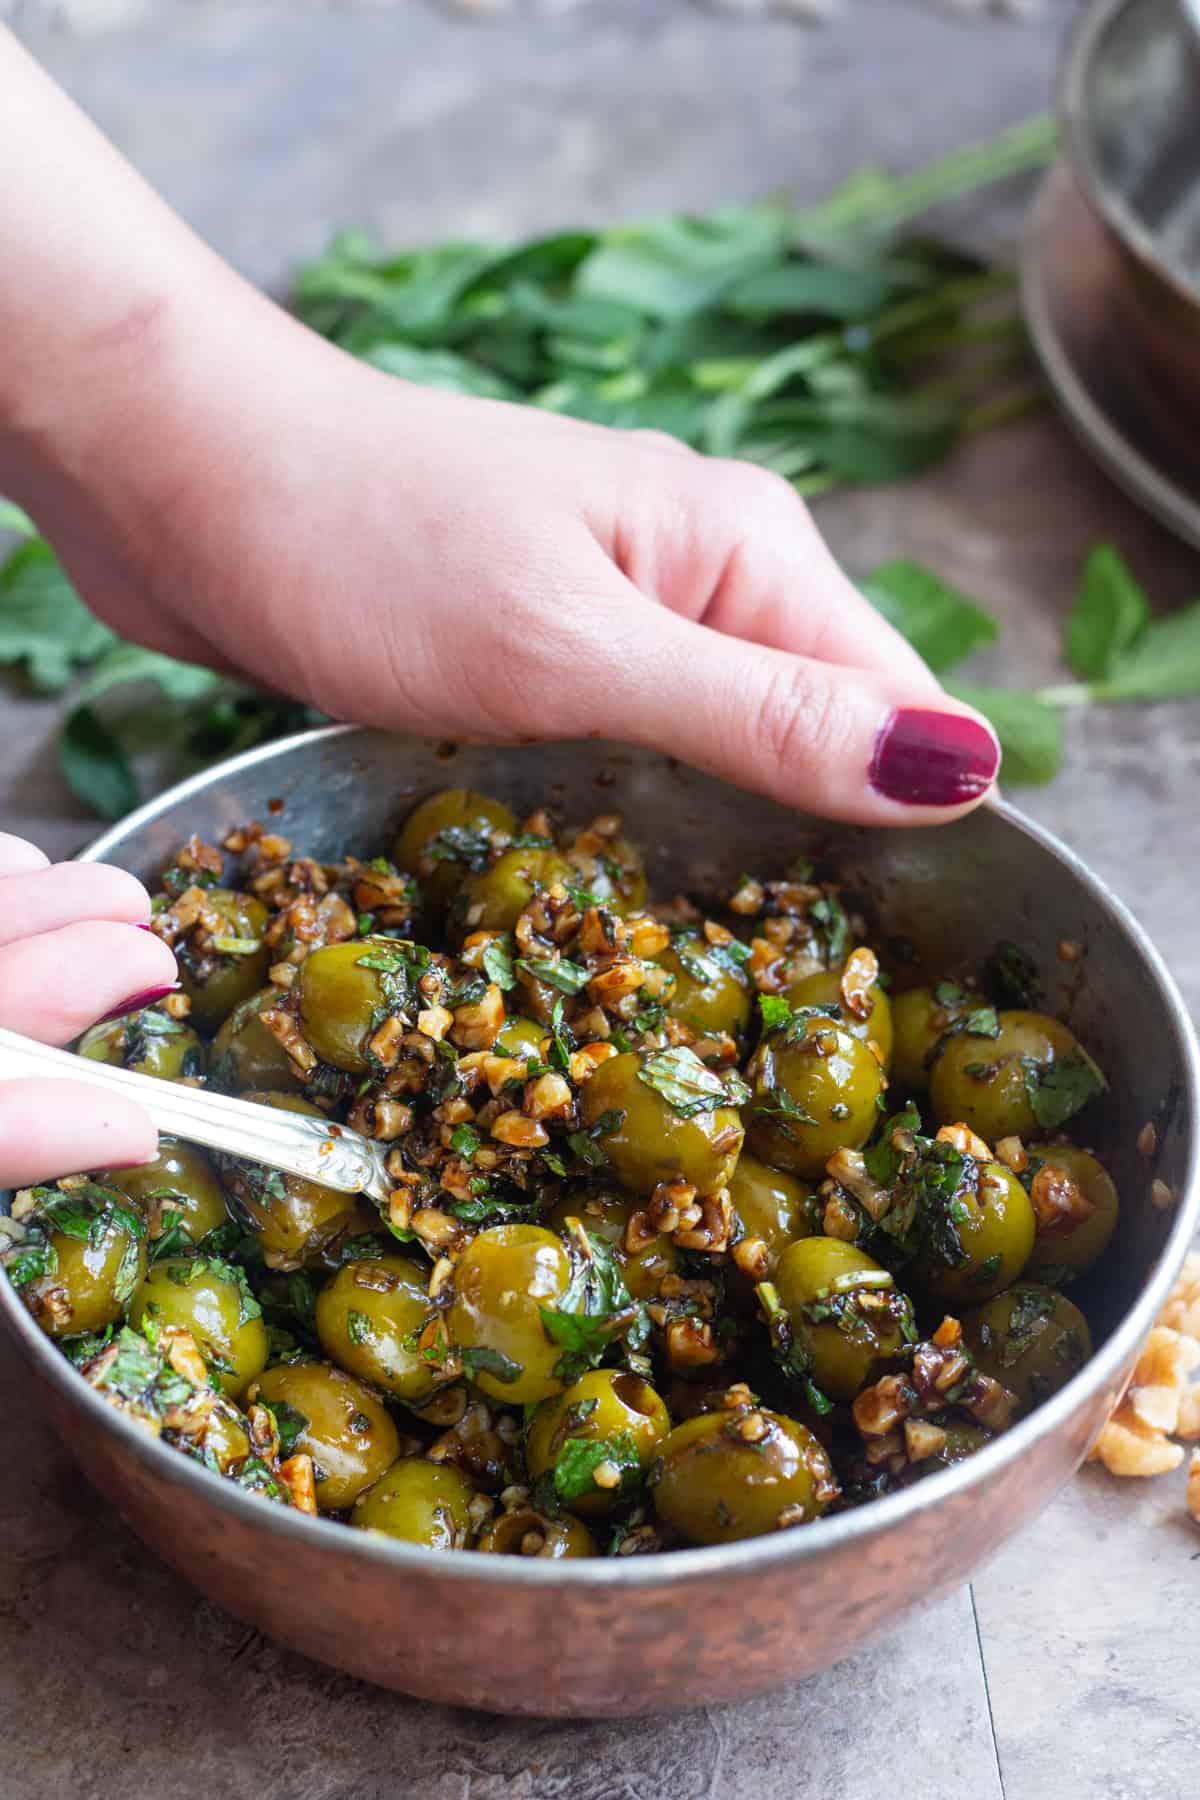 Marinated Olives made Persian style! Delicious olives marinated with walnuts, pomegranate molasses and herbs make a fantastic combination that is full of flavor!
